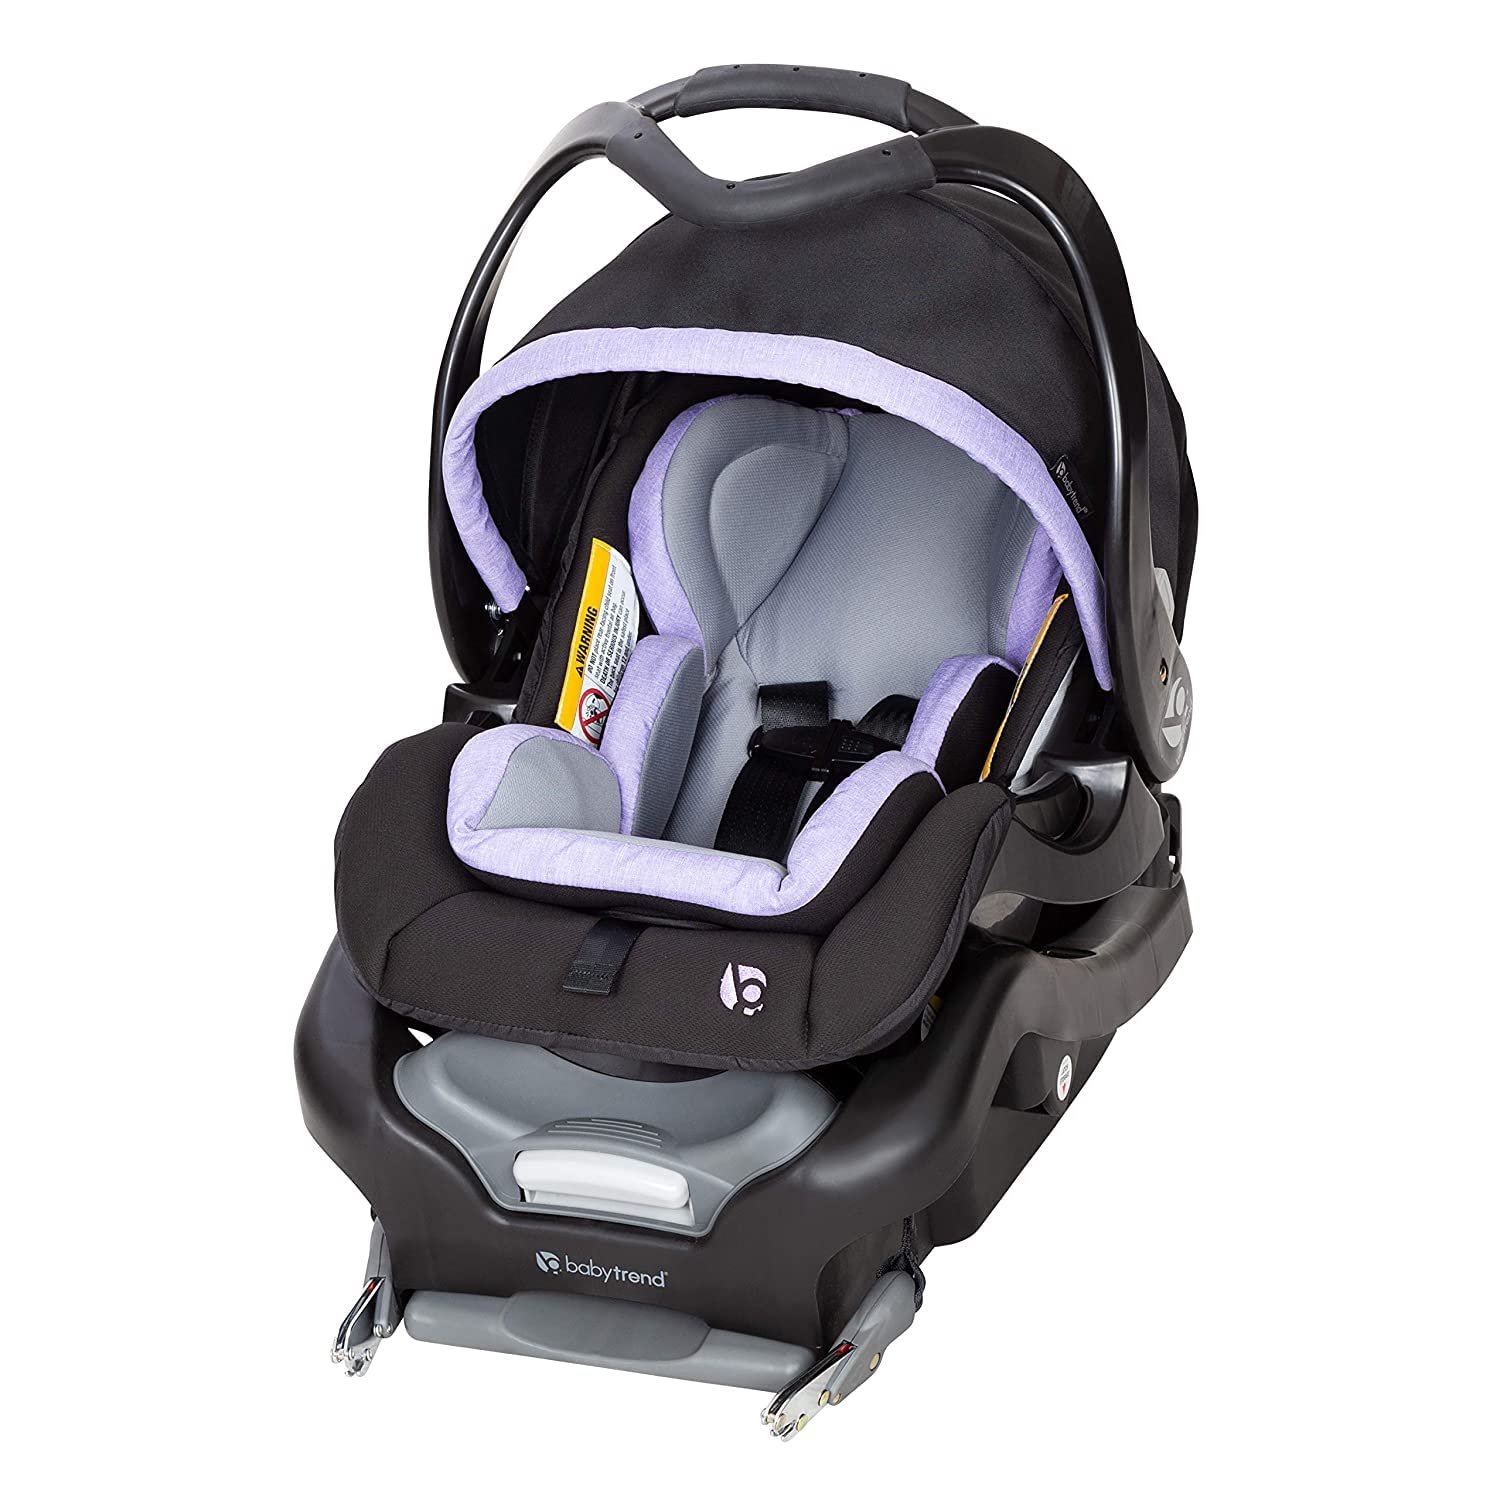 2. Baby Trend Secure Snap Infant Car Seat